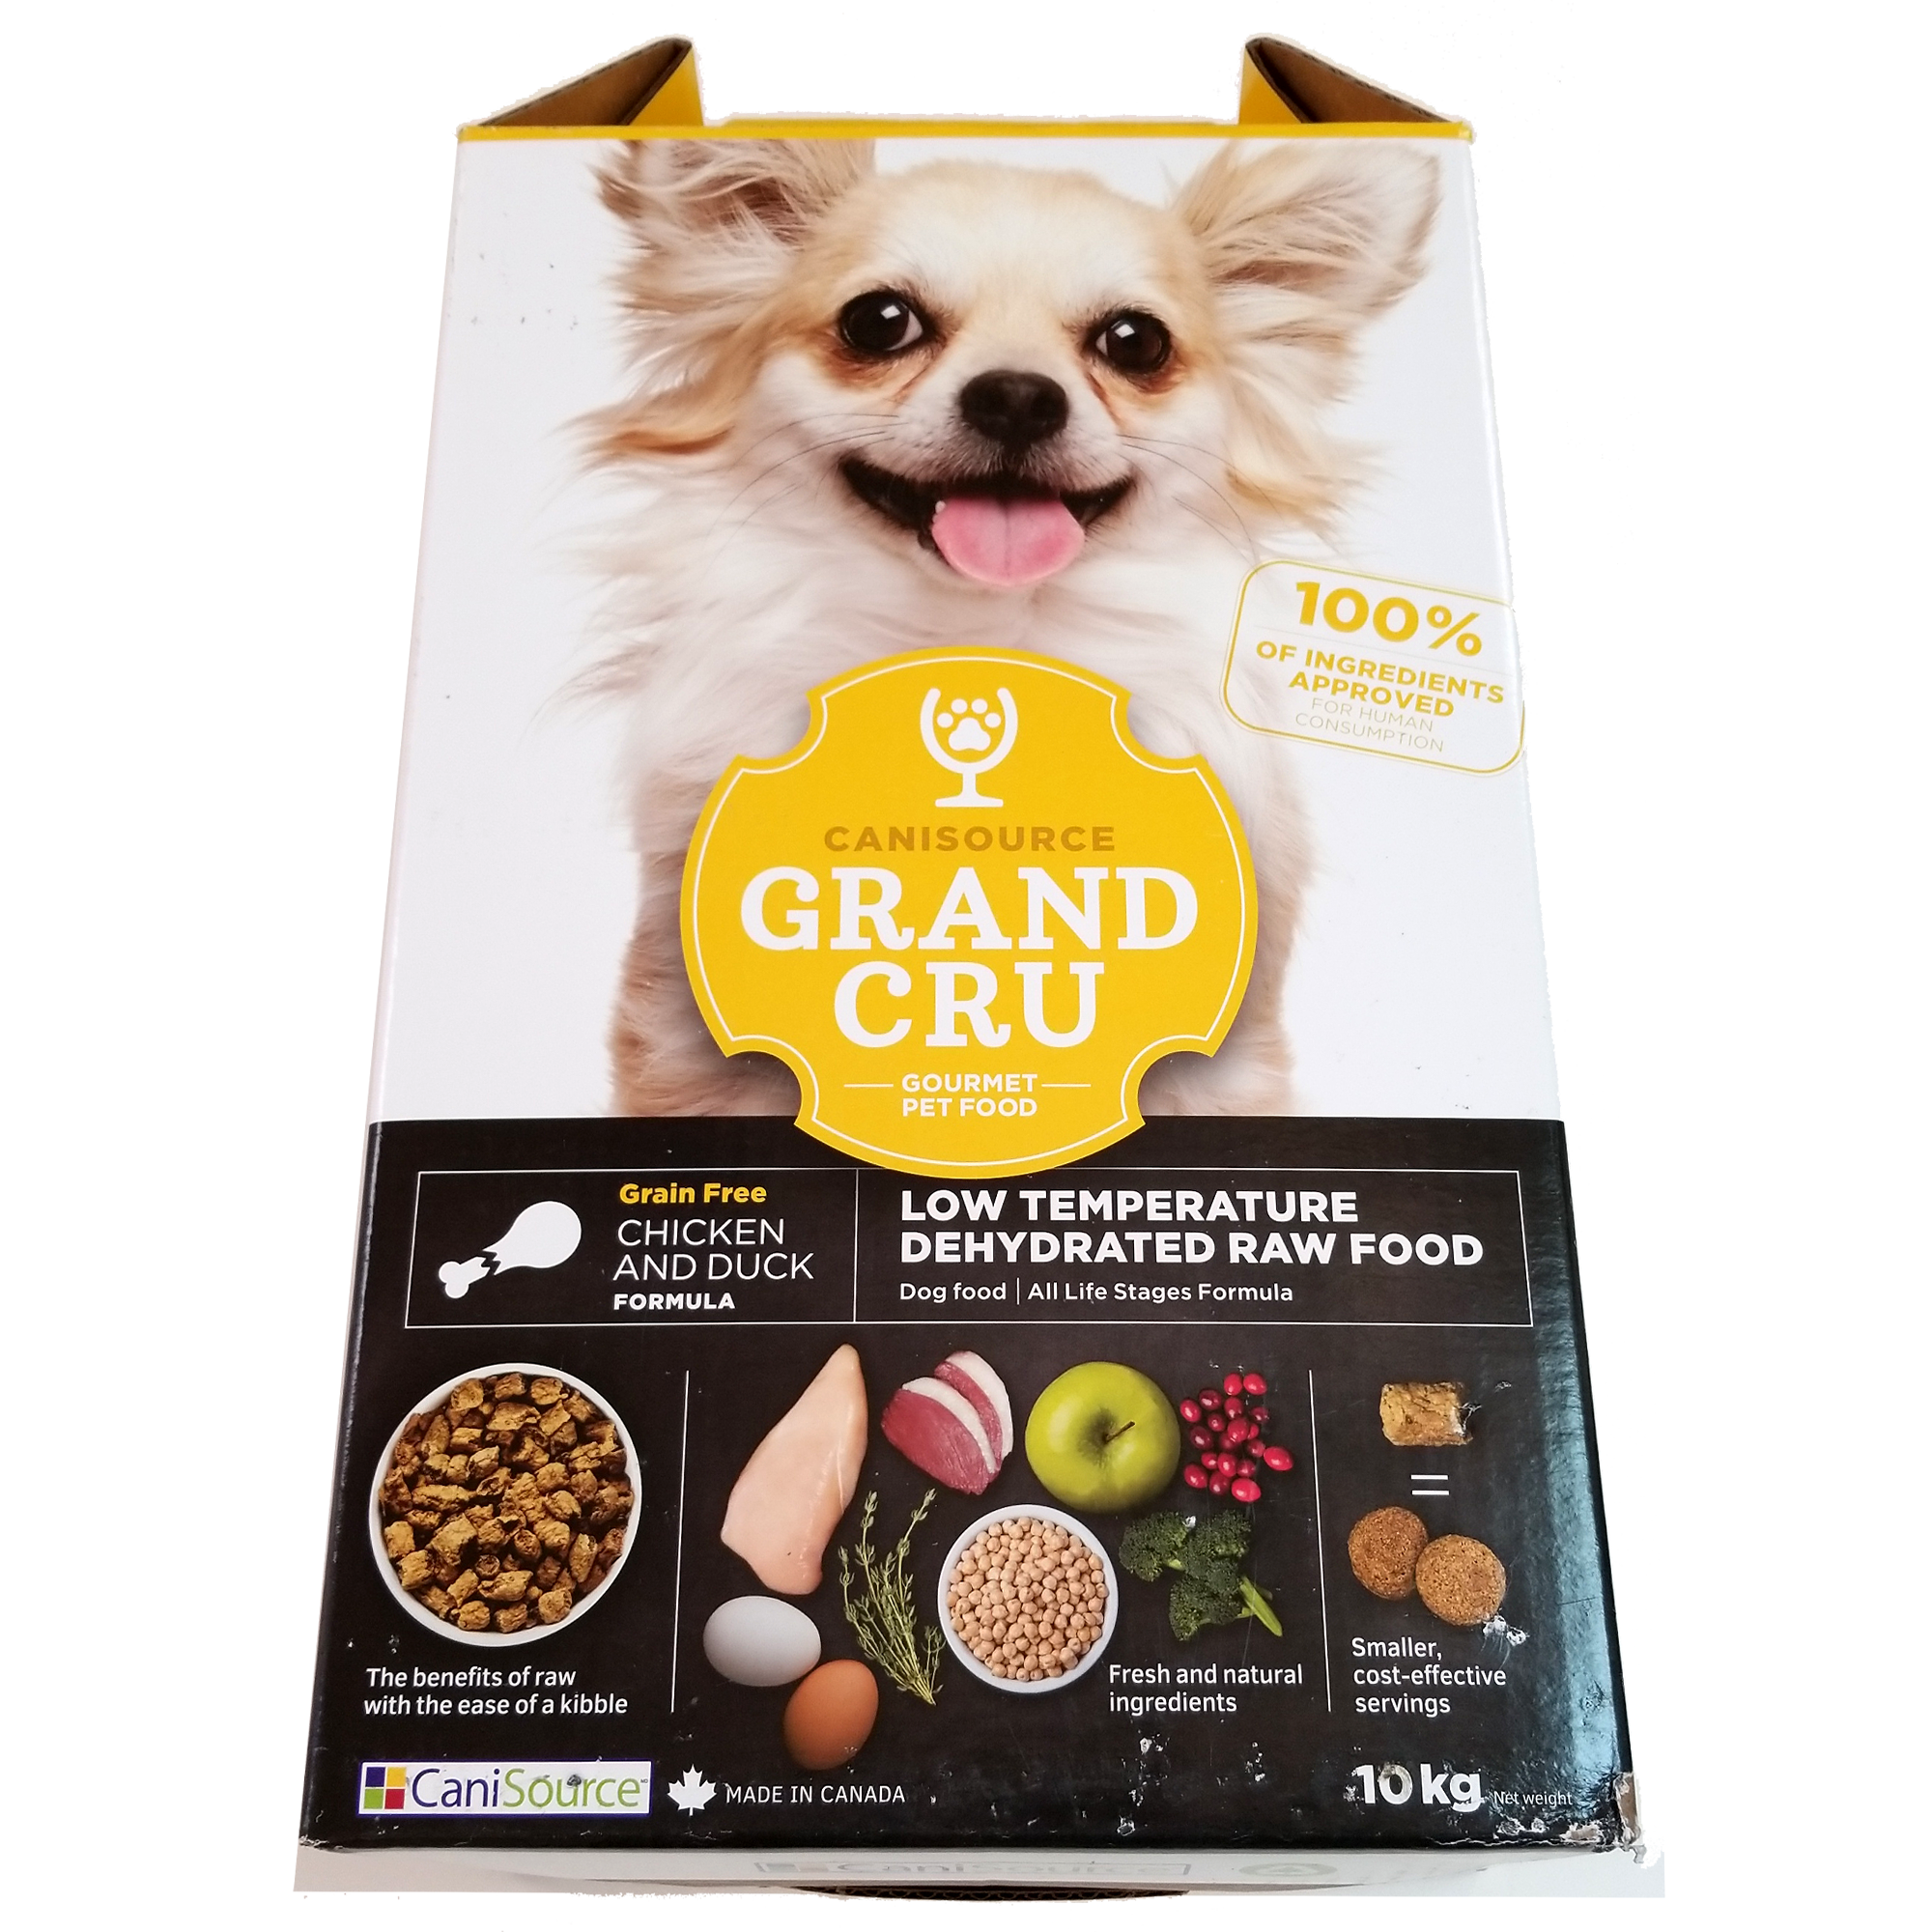 Canisource Grand Cru, Low Temperature Dehydrated Raw Dog Food, Grain-Free Formula, Chicken & Duck, 10kg